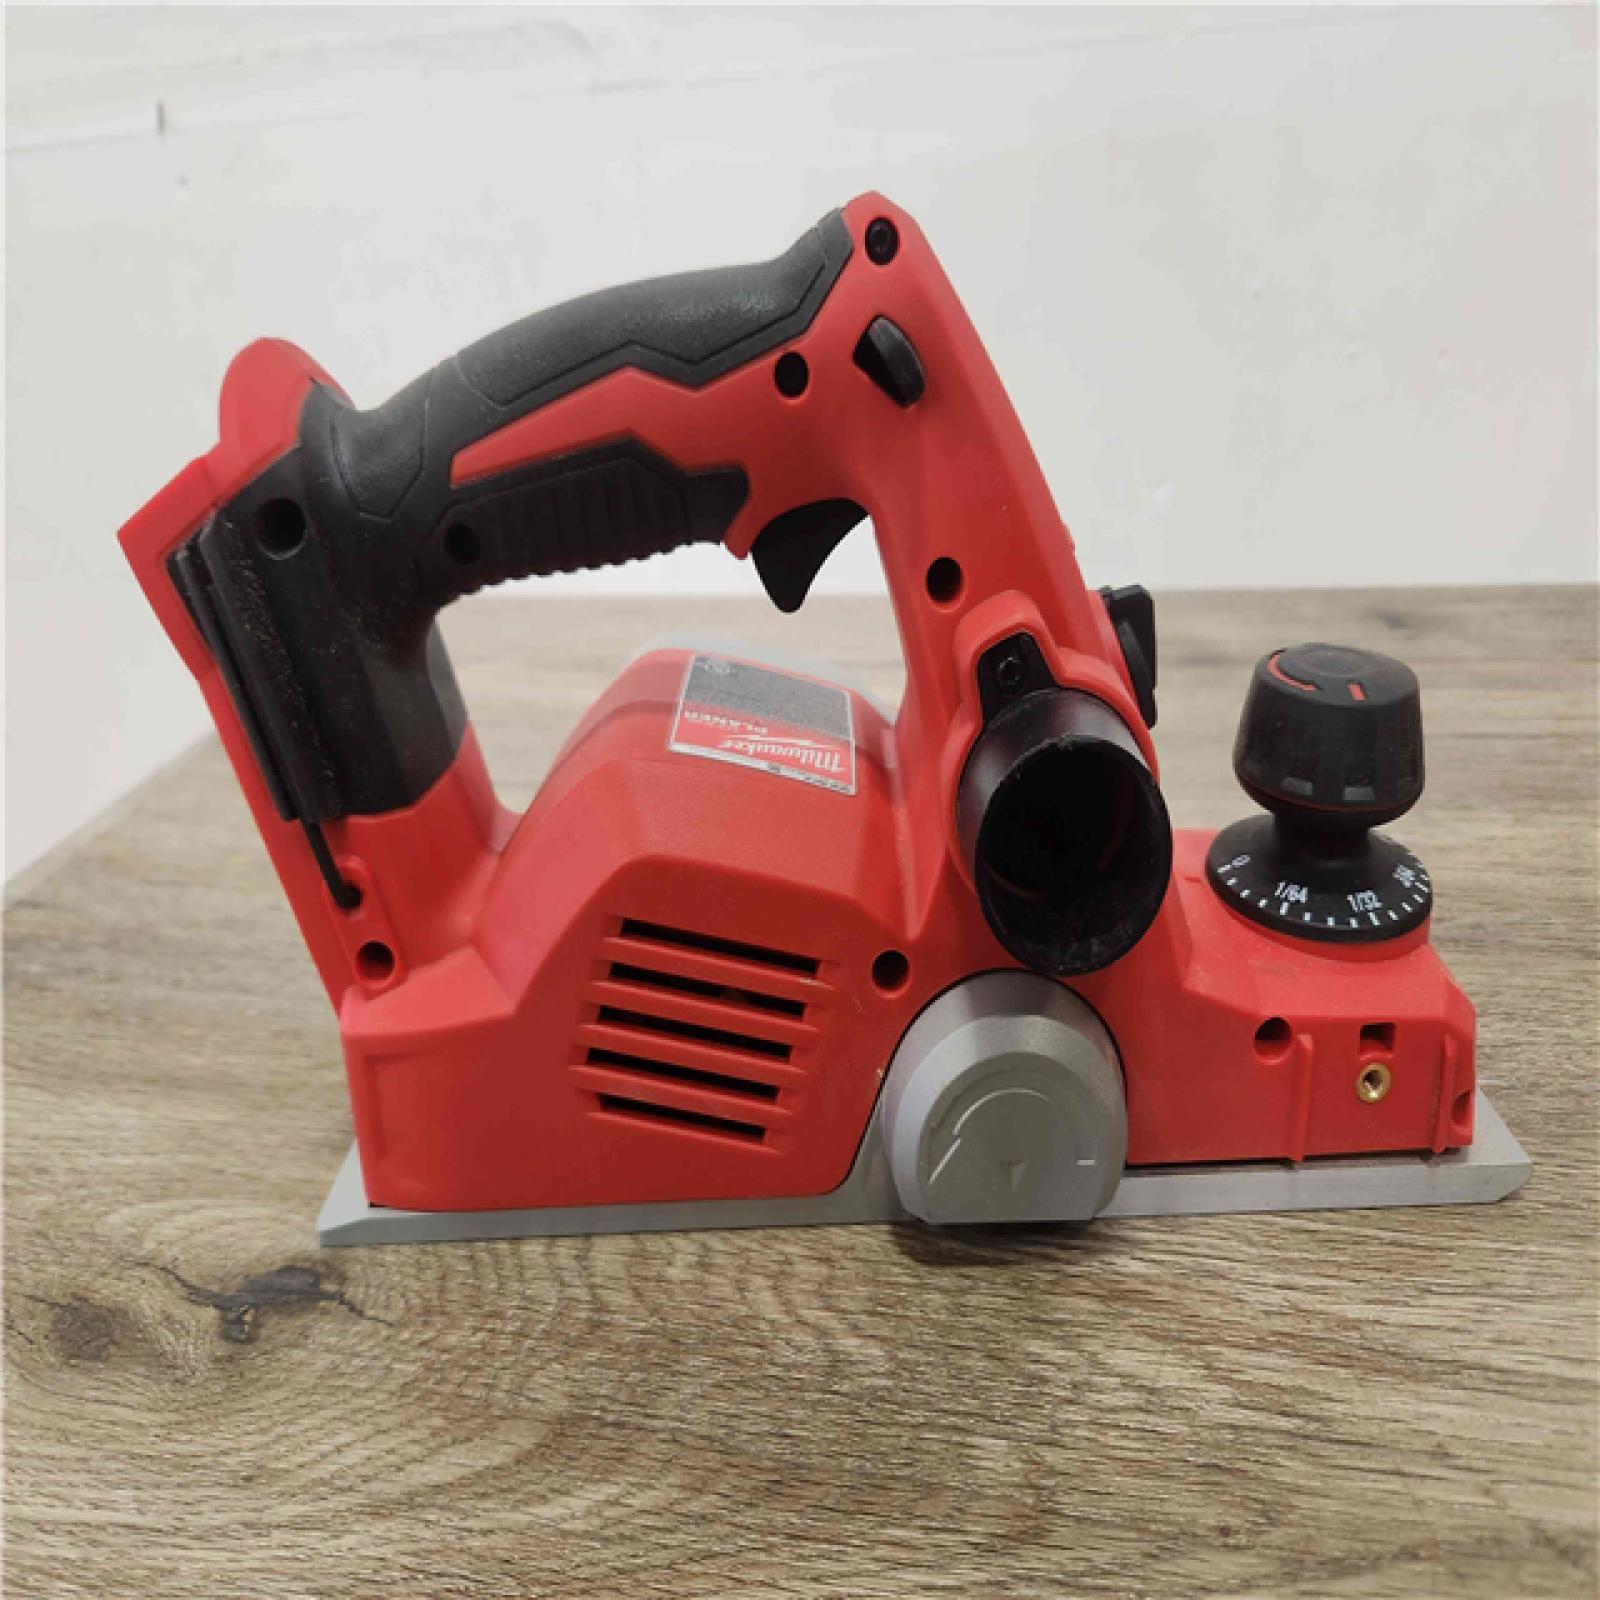 Phoenix Location NEW Milwaukee M18 18V Lithium-Ion Cordless 3-1/4 in. Planer (Tool-Only) 2623-20